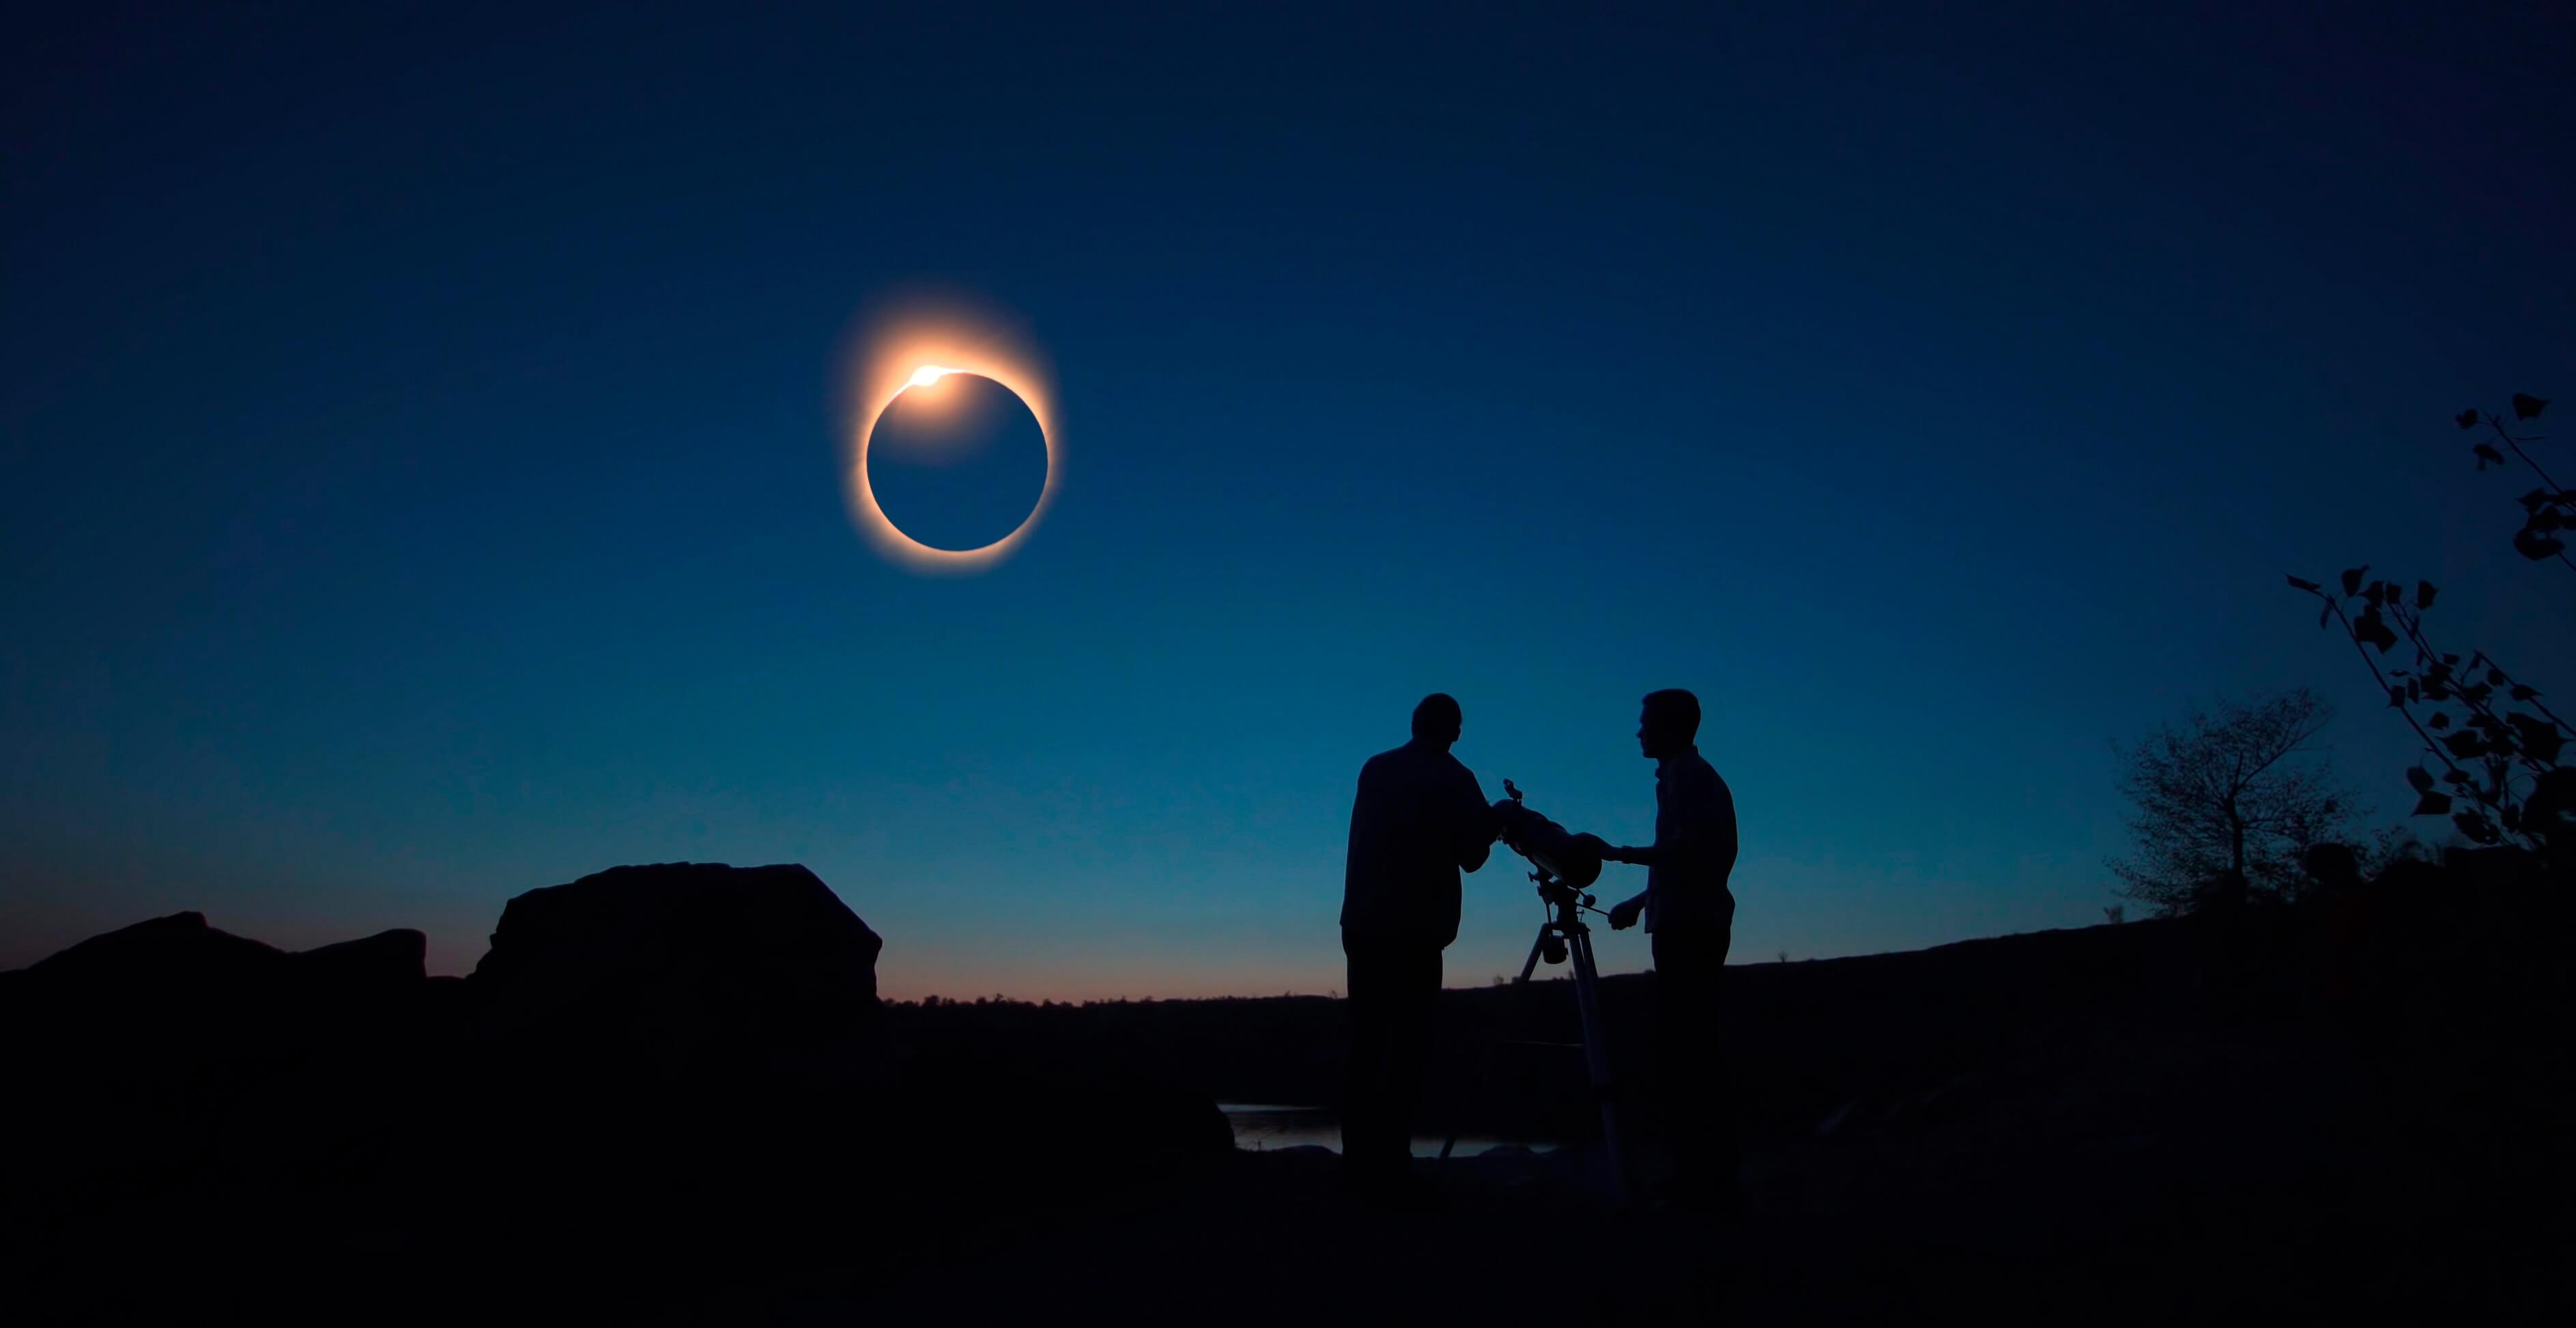 Two human silhouettes stand next to a large telescope and look toward a total solar eclipse in the sky.